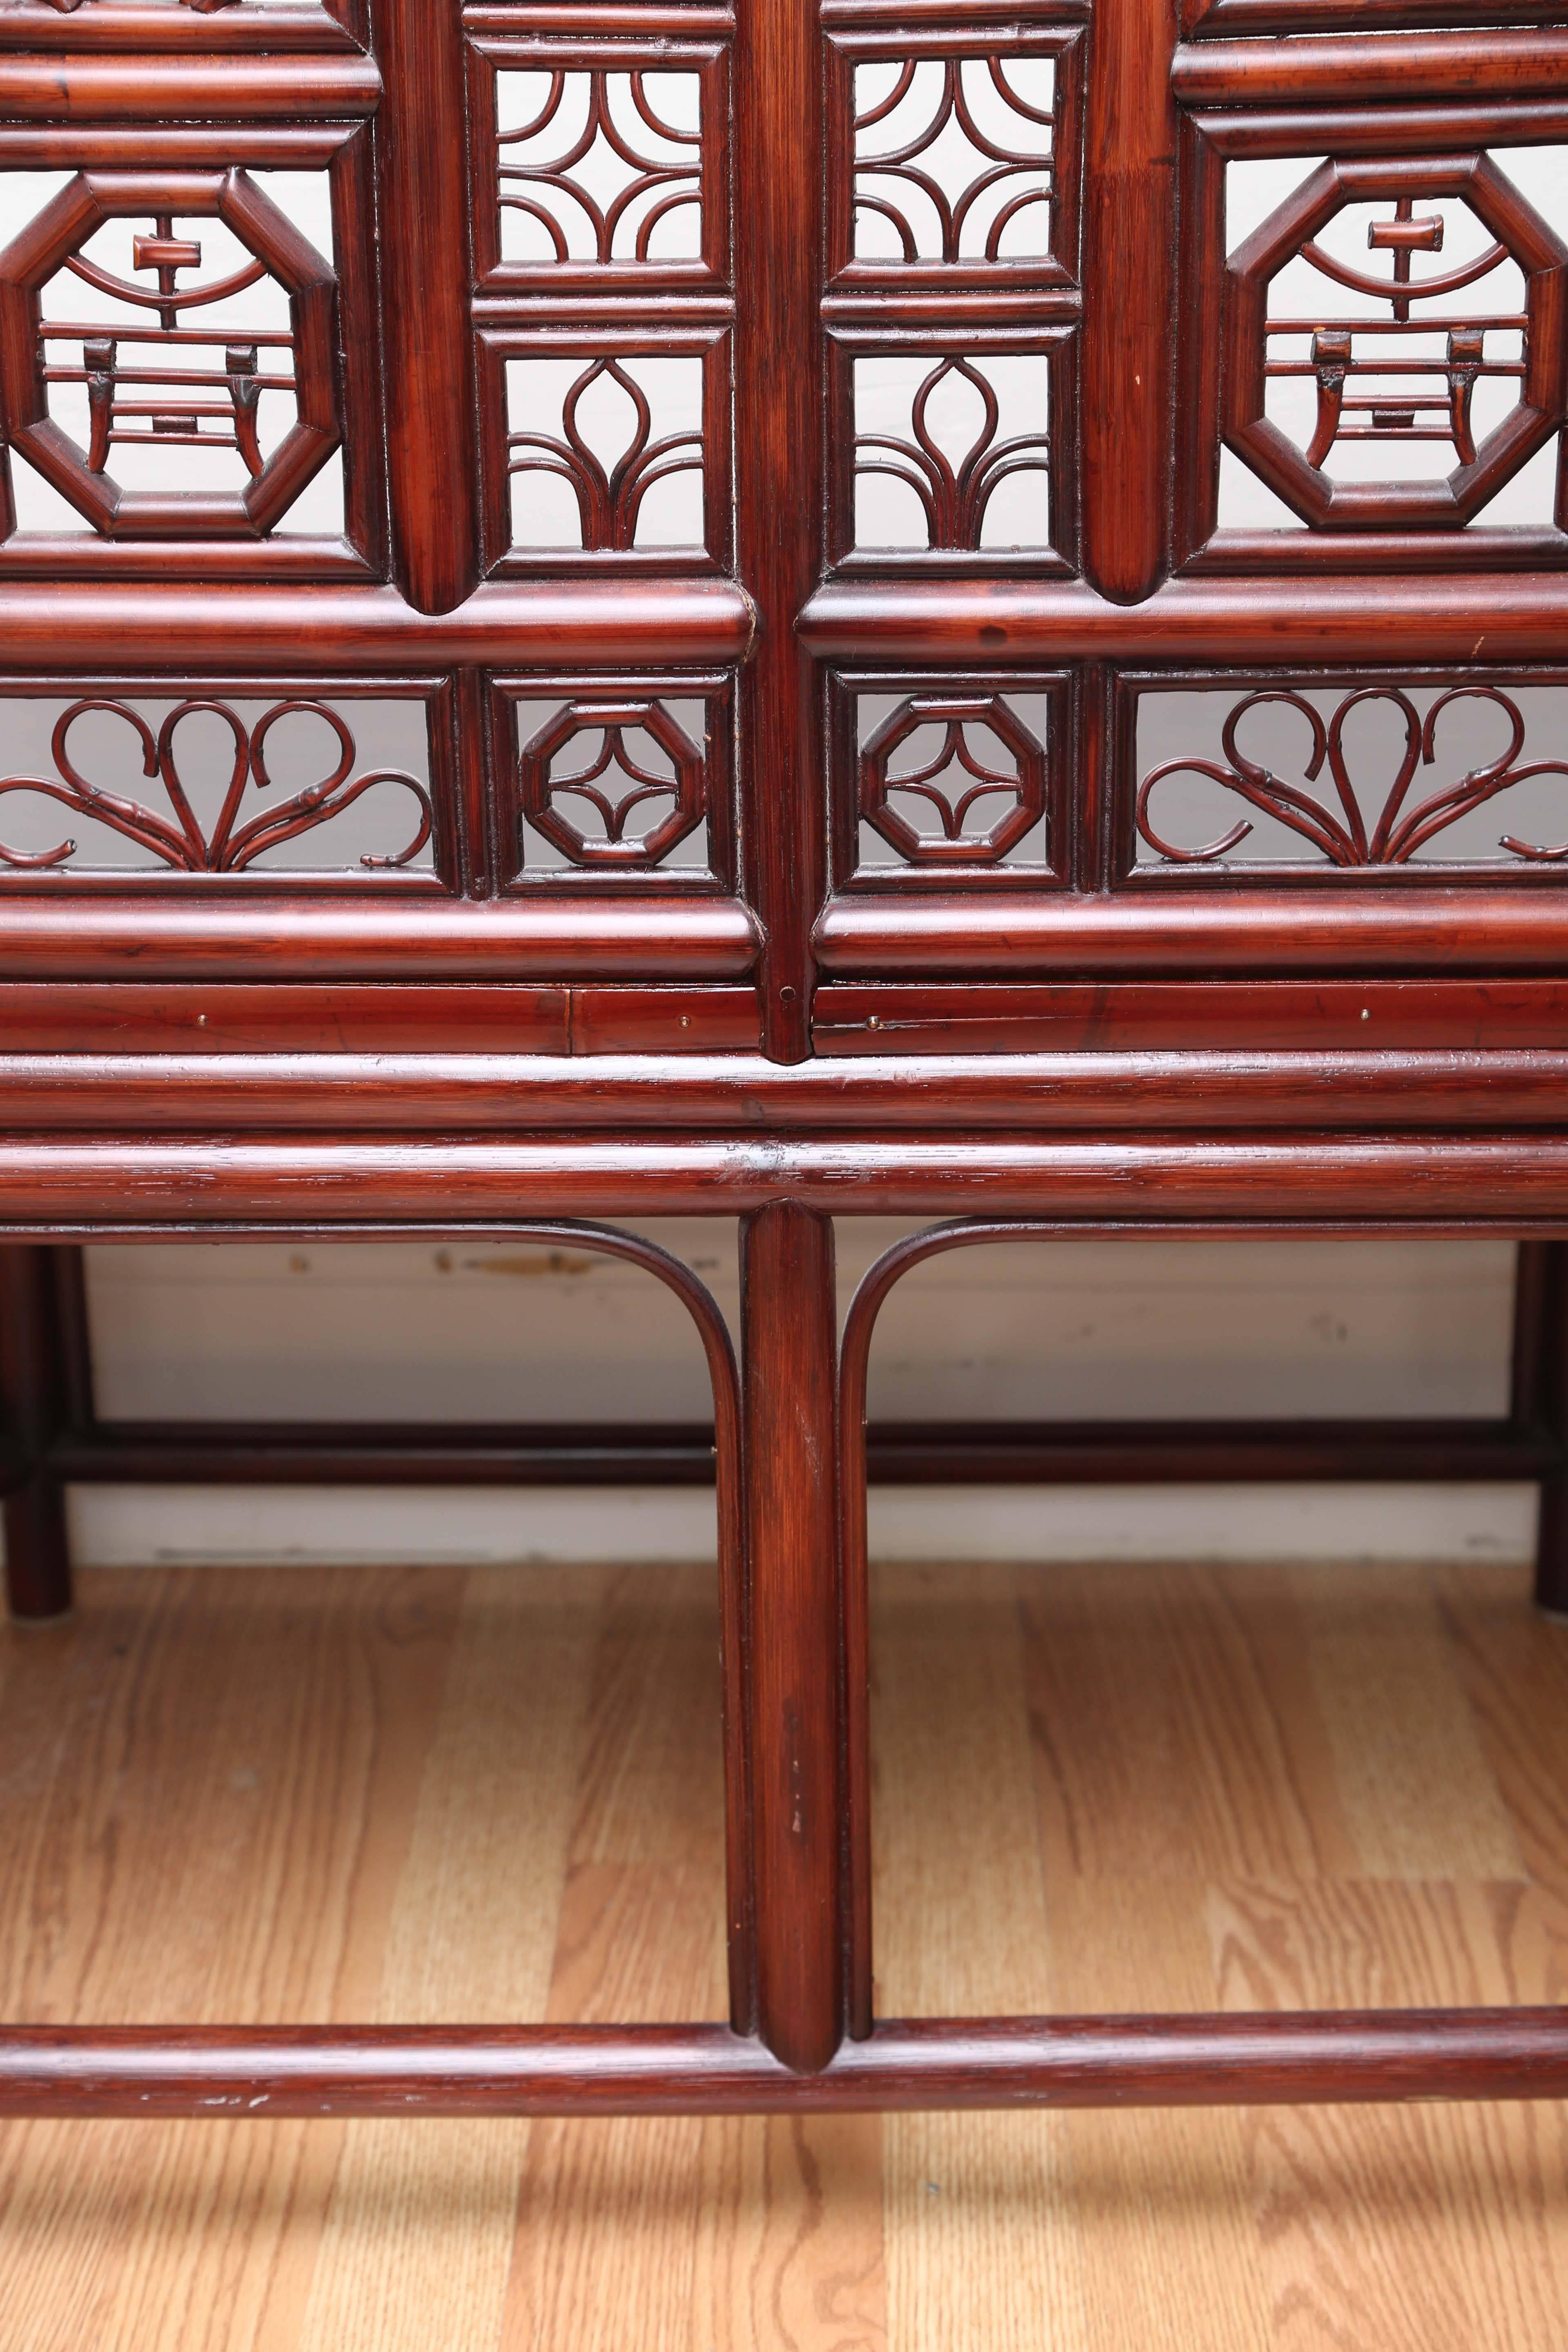 Charming pagoda style Asian loveseat with beautiful fretwork back and sides. Very fine detail. A beautiful entryway piece.